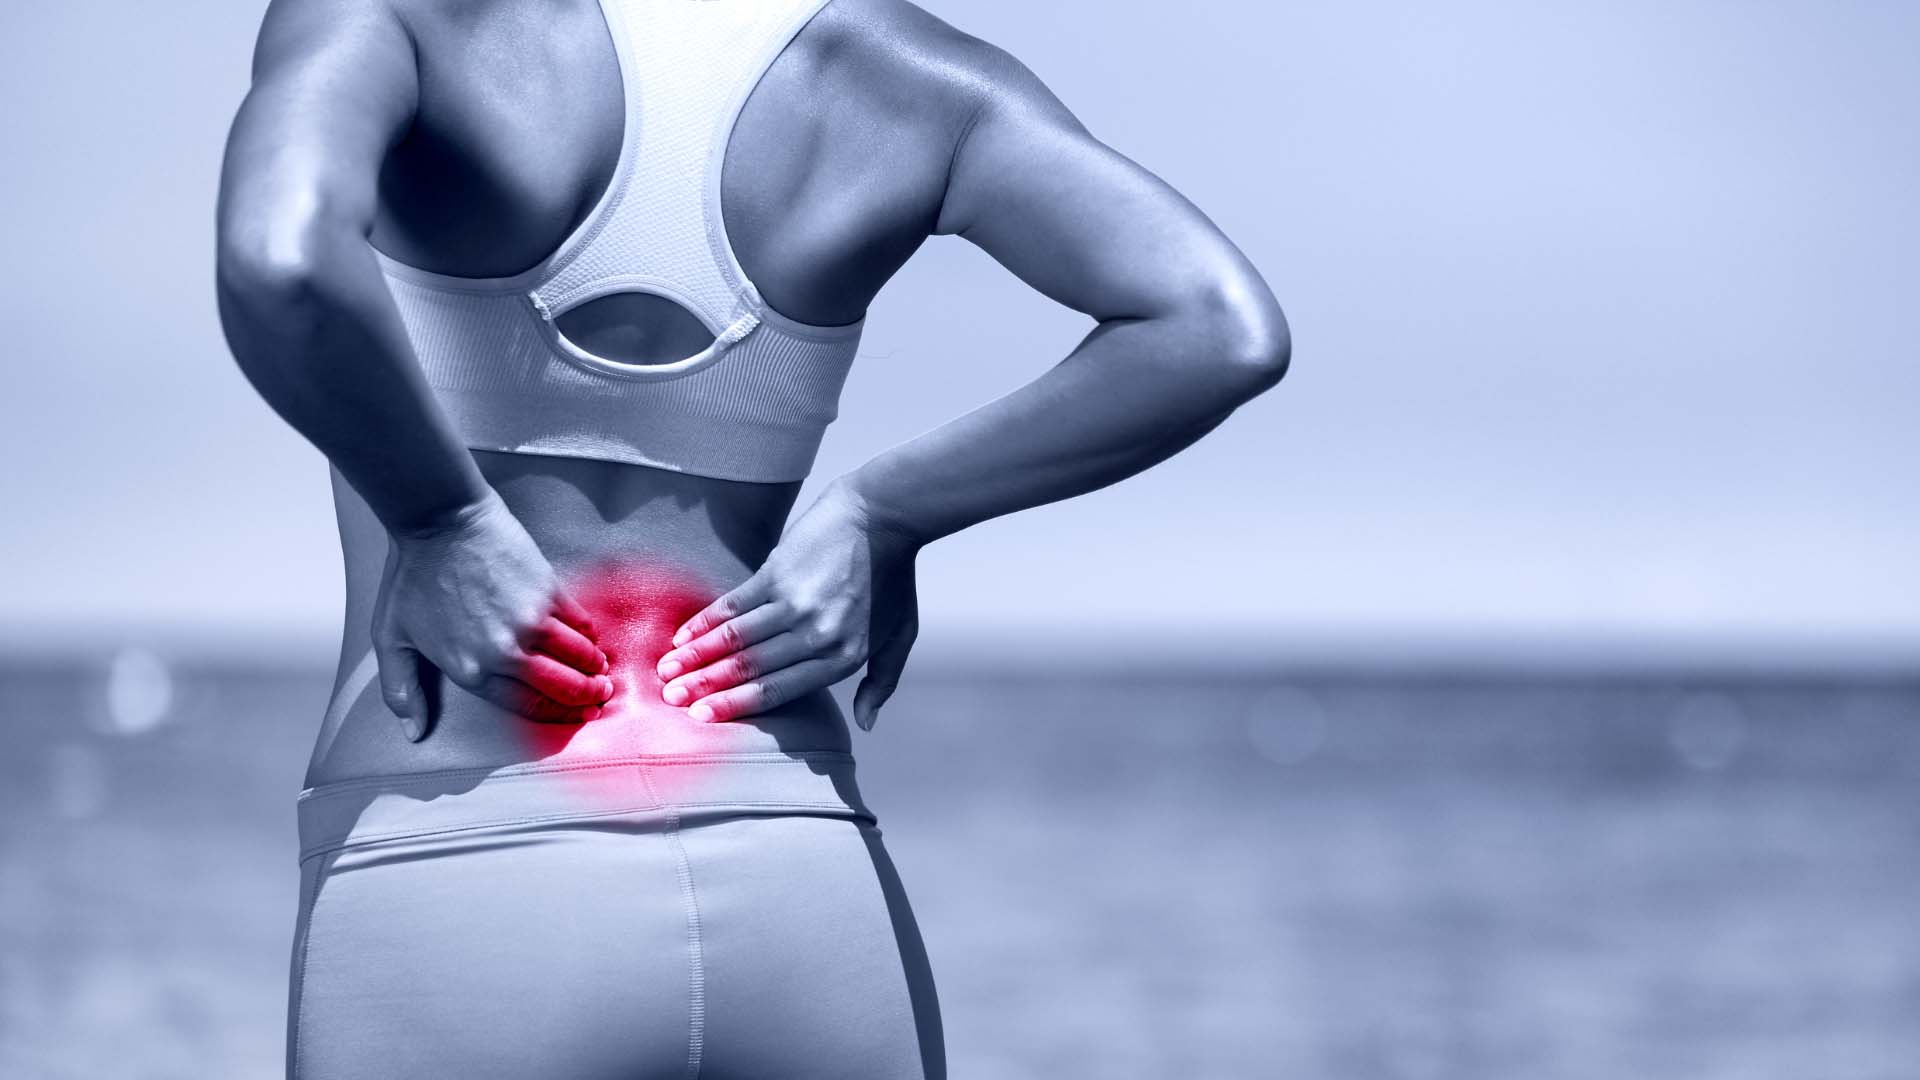 https://foxpt.com/wp-content/uploads/2023/03/sciatica-back-pain-physical-therapy-miami-boca-raton.jpg